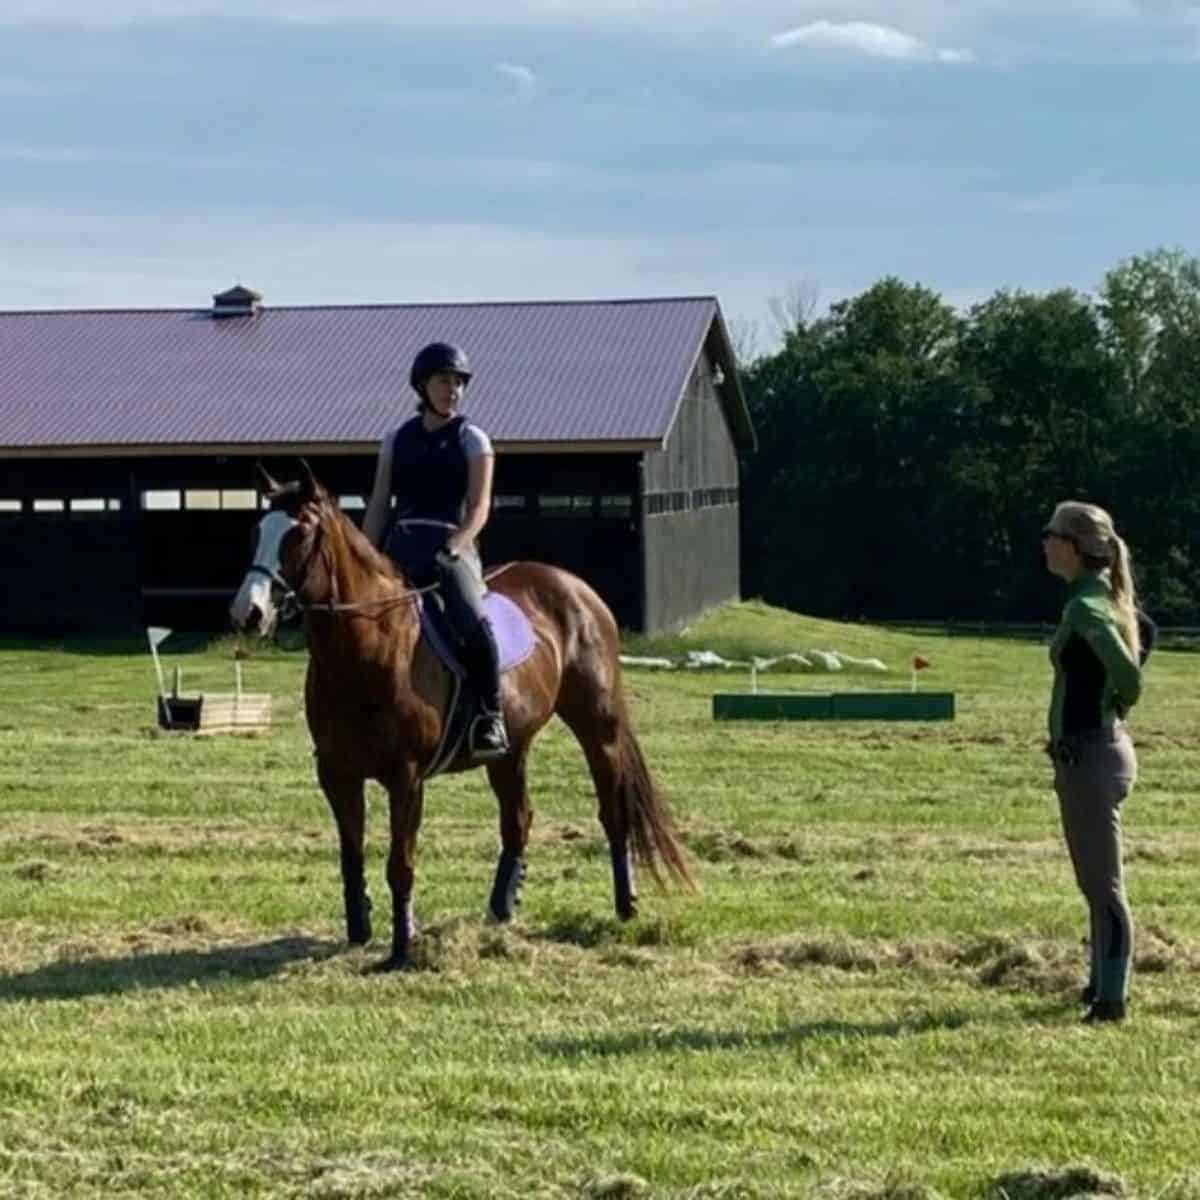 Two horse trainers teaching a brown horse on a ranch.